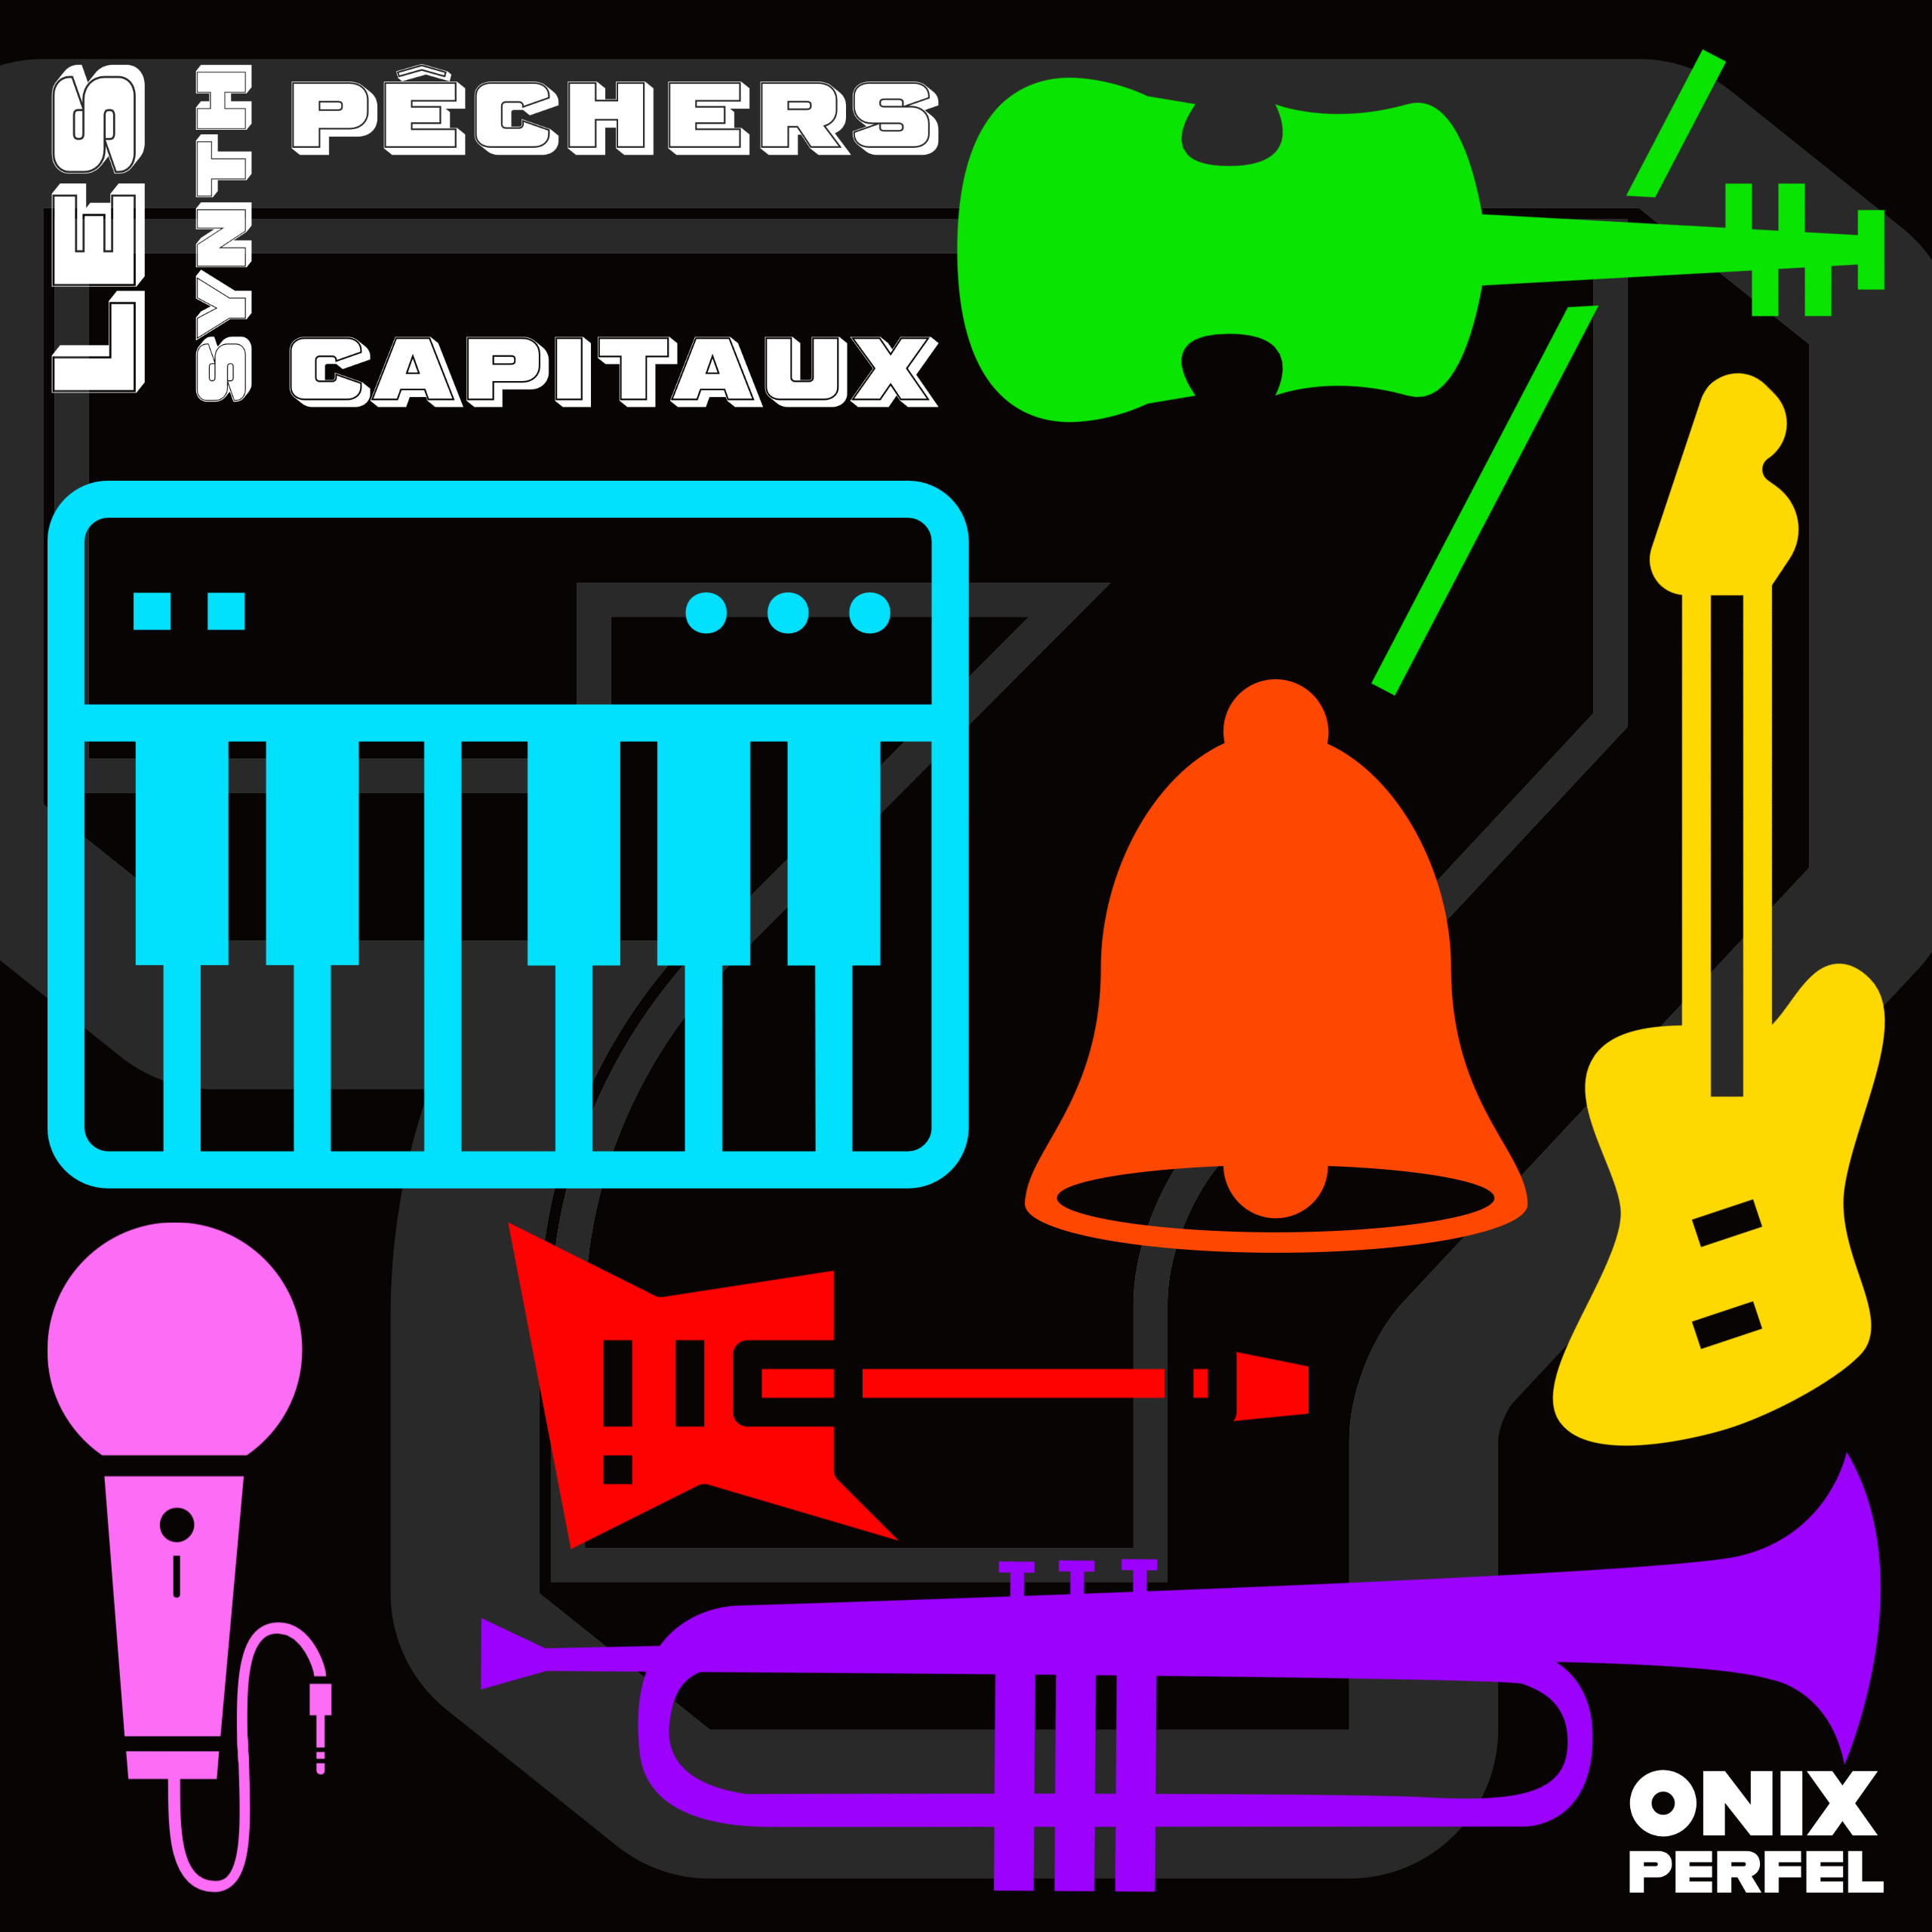 Onix Perfel – Les synth pêchers capitaux (The Seven Deadly Synths)